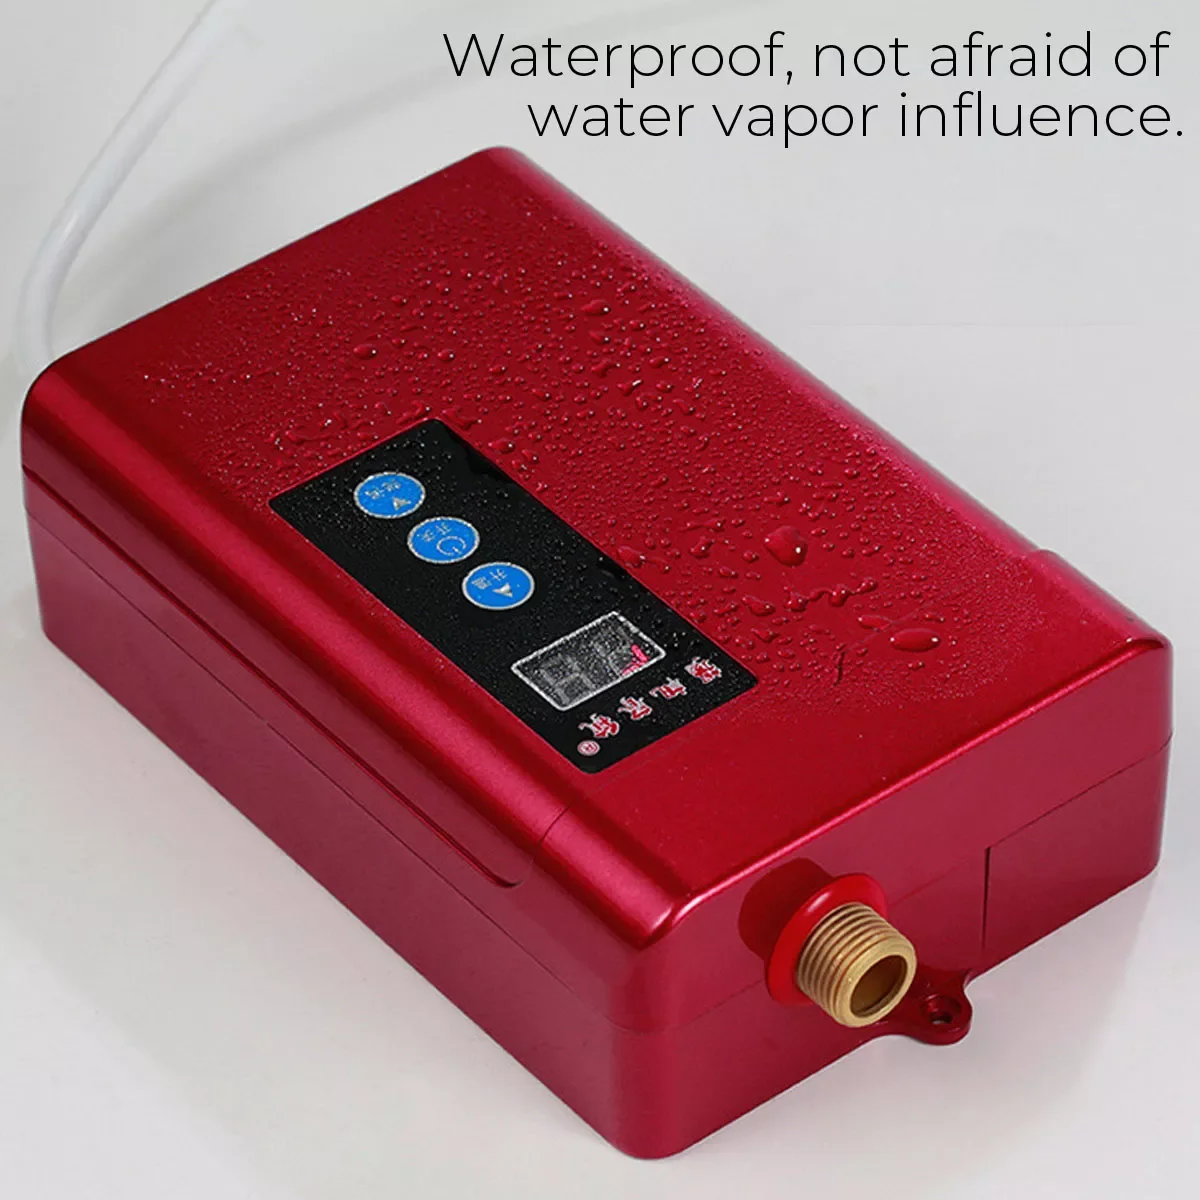 4000W 110-240V Instant Electric Mini Tankless Water Heater Hot Instantaneous Water Heater System for Kitchen Bathroom enlarge